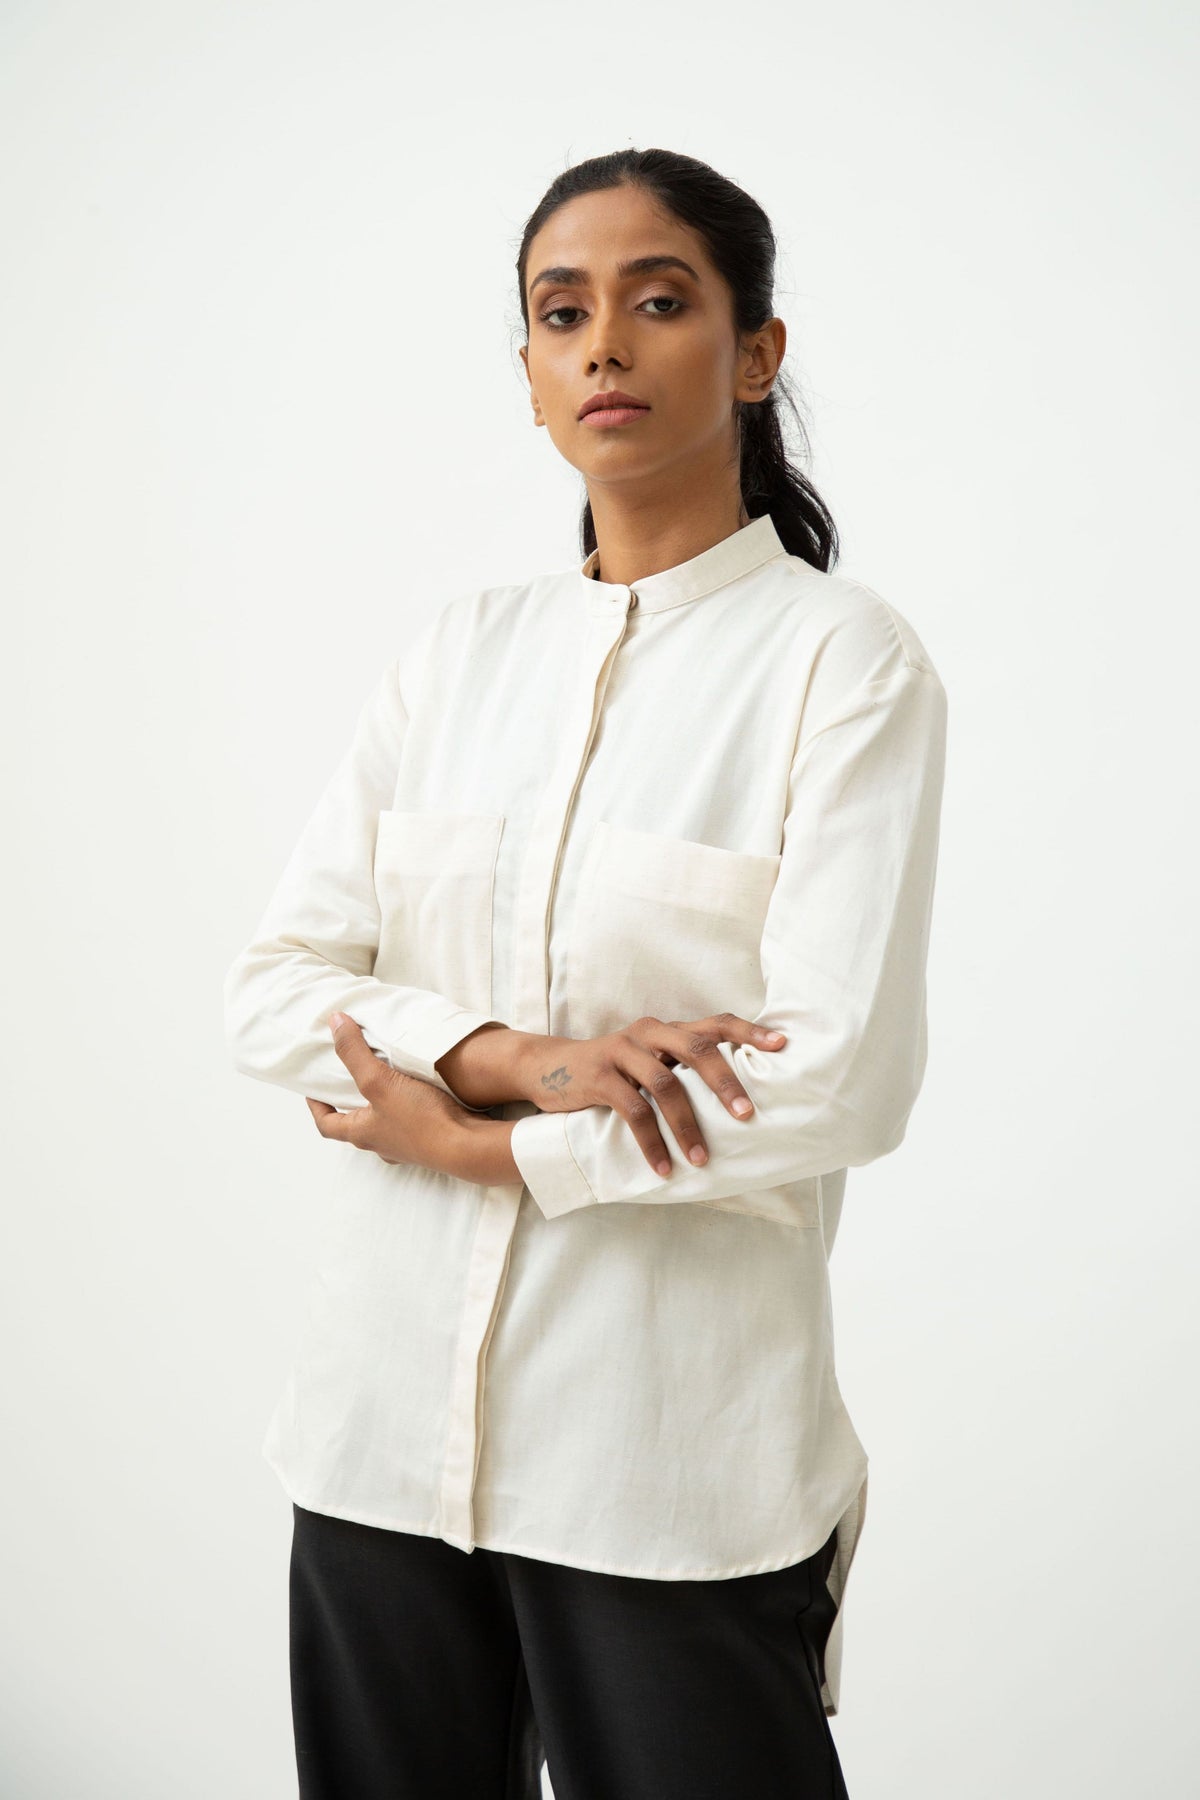 Saltpetre womens formal shirts - vanilla white with mandarin collar, full sleeves and front buttons. Made of 100% organic cotton